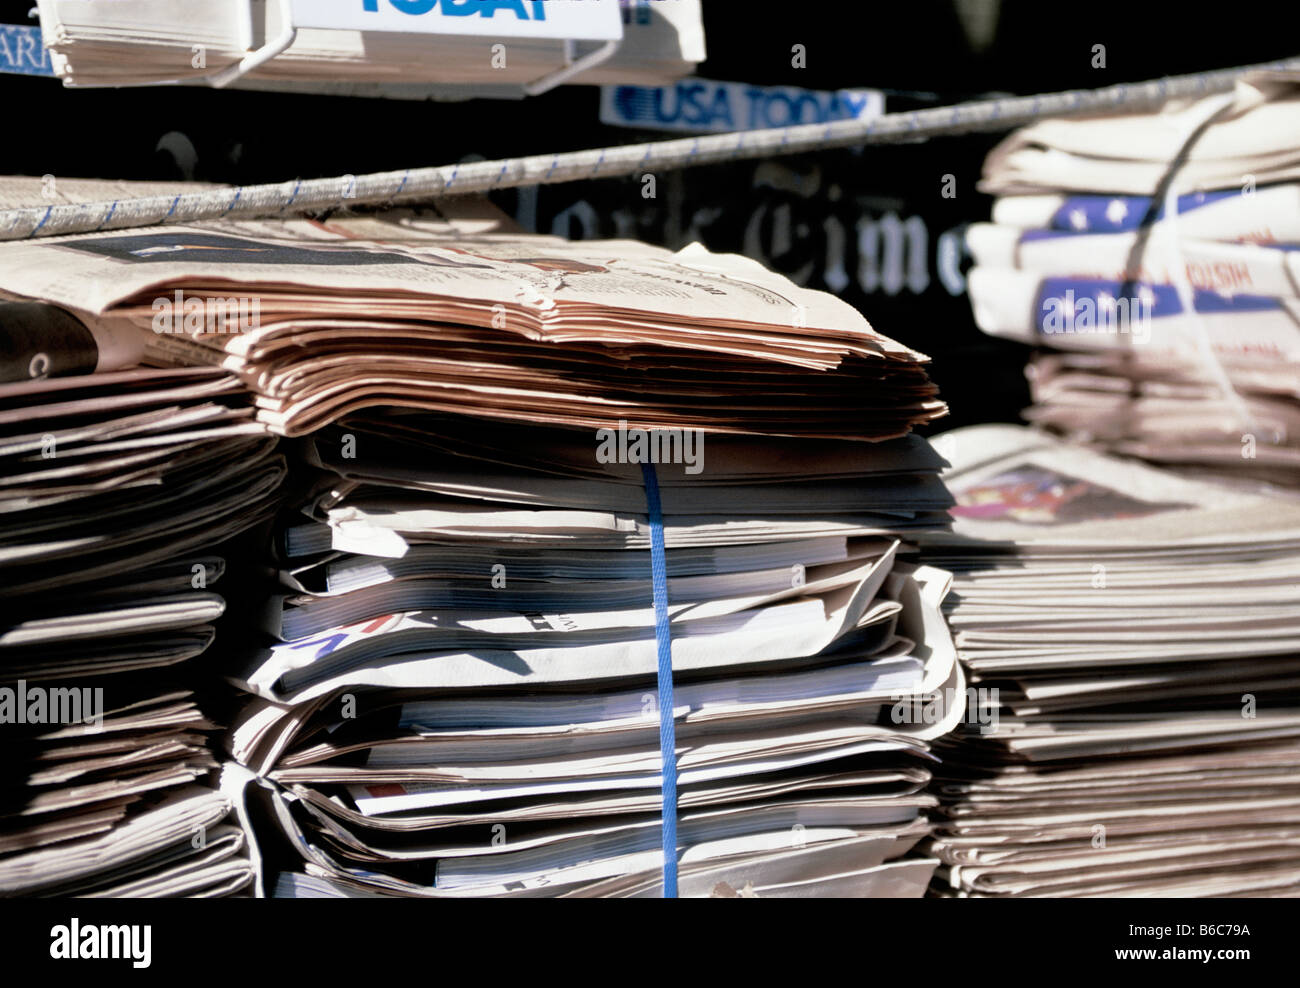 Stacks of bound newspapers waiting for recycling at collection site in New York City Stock Photo